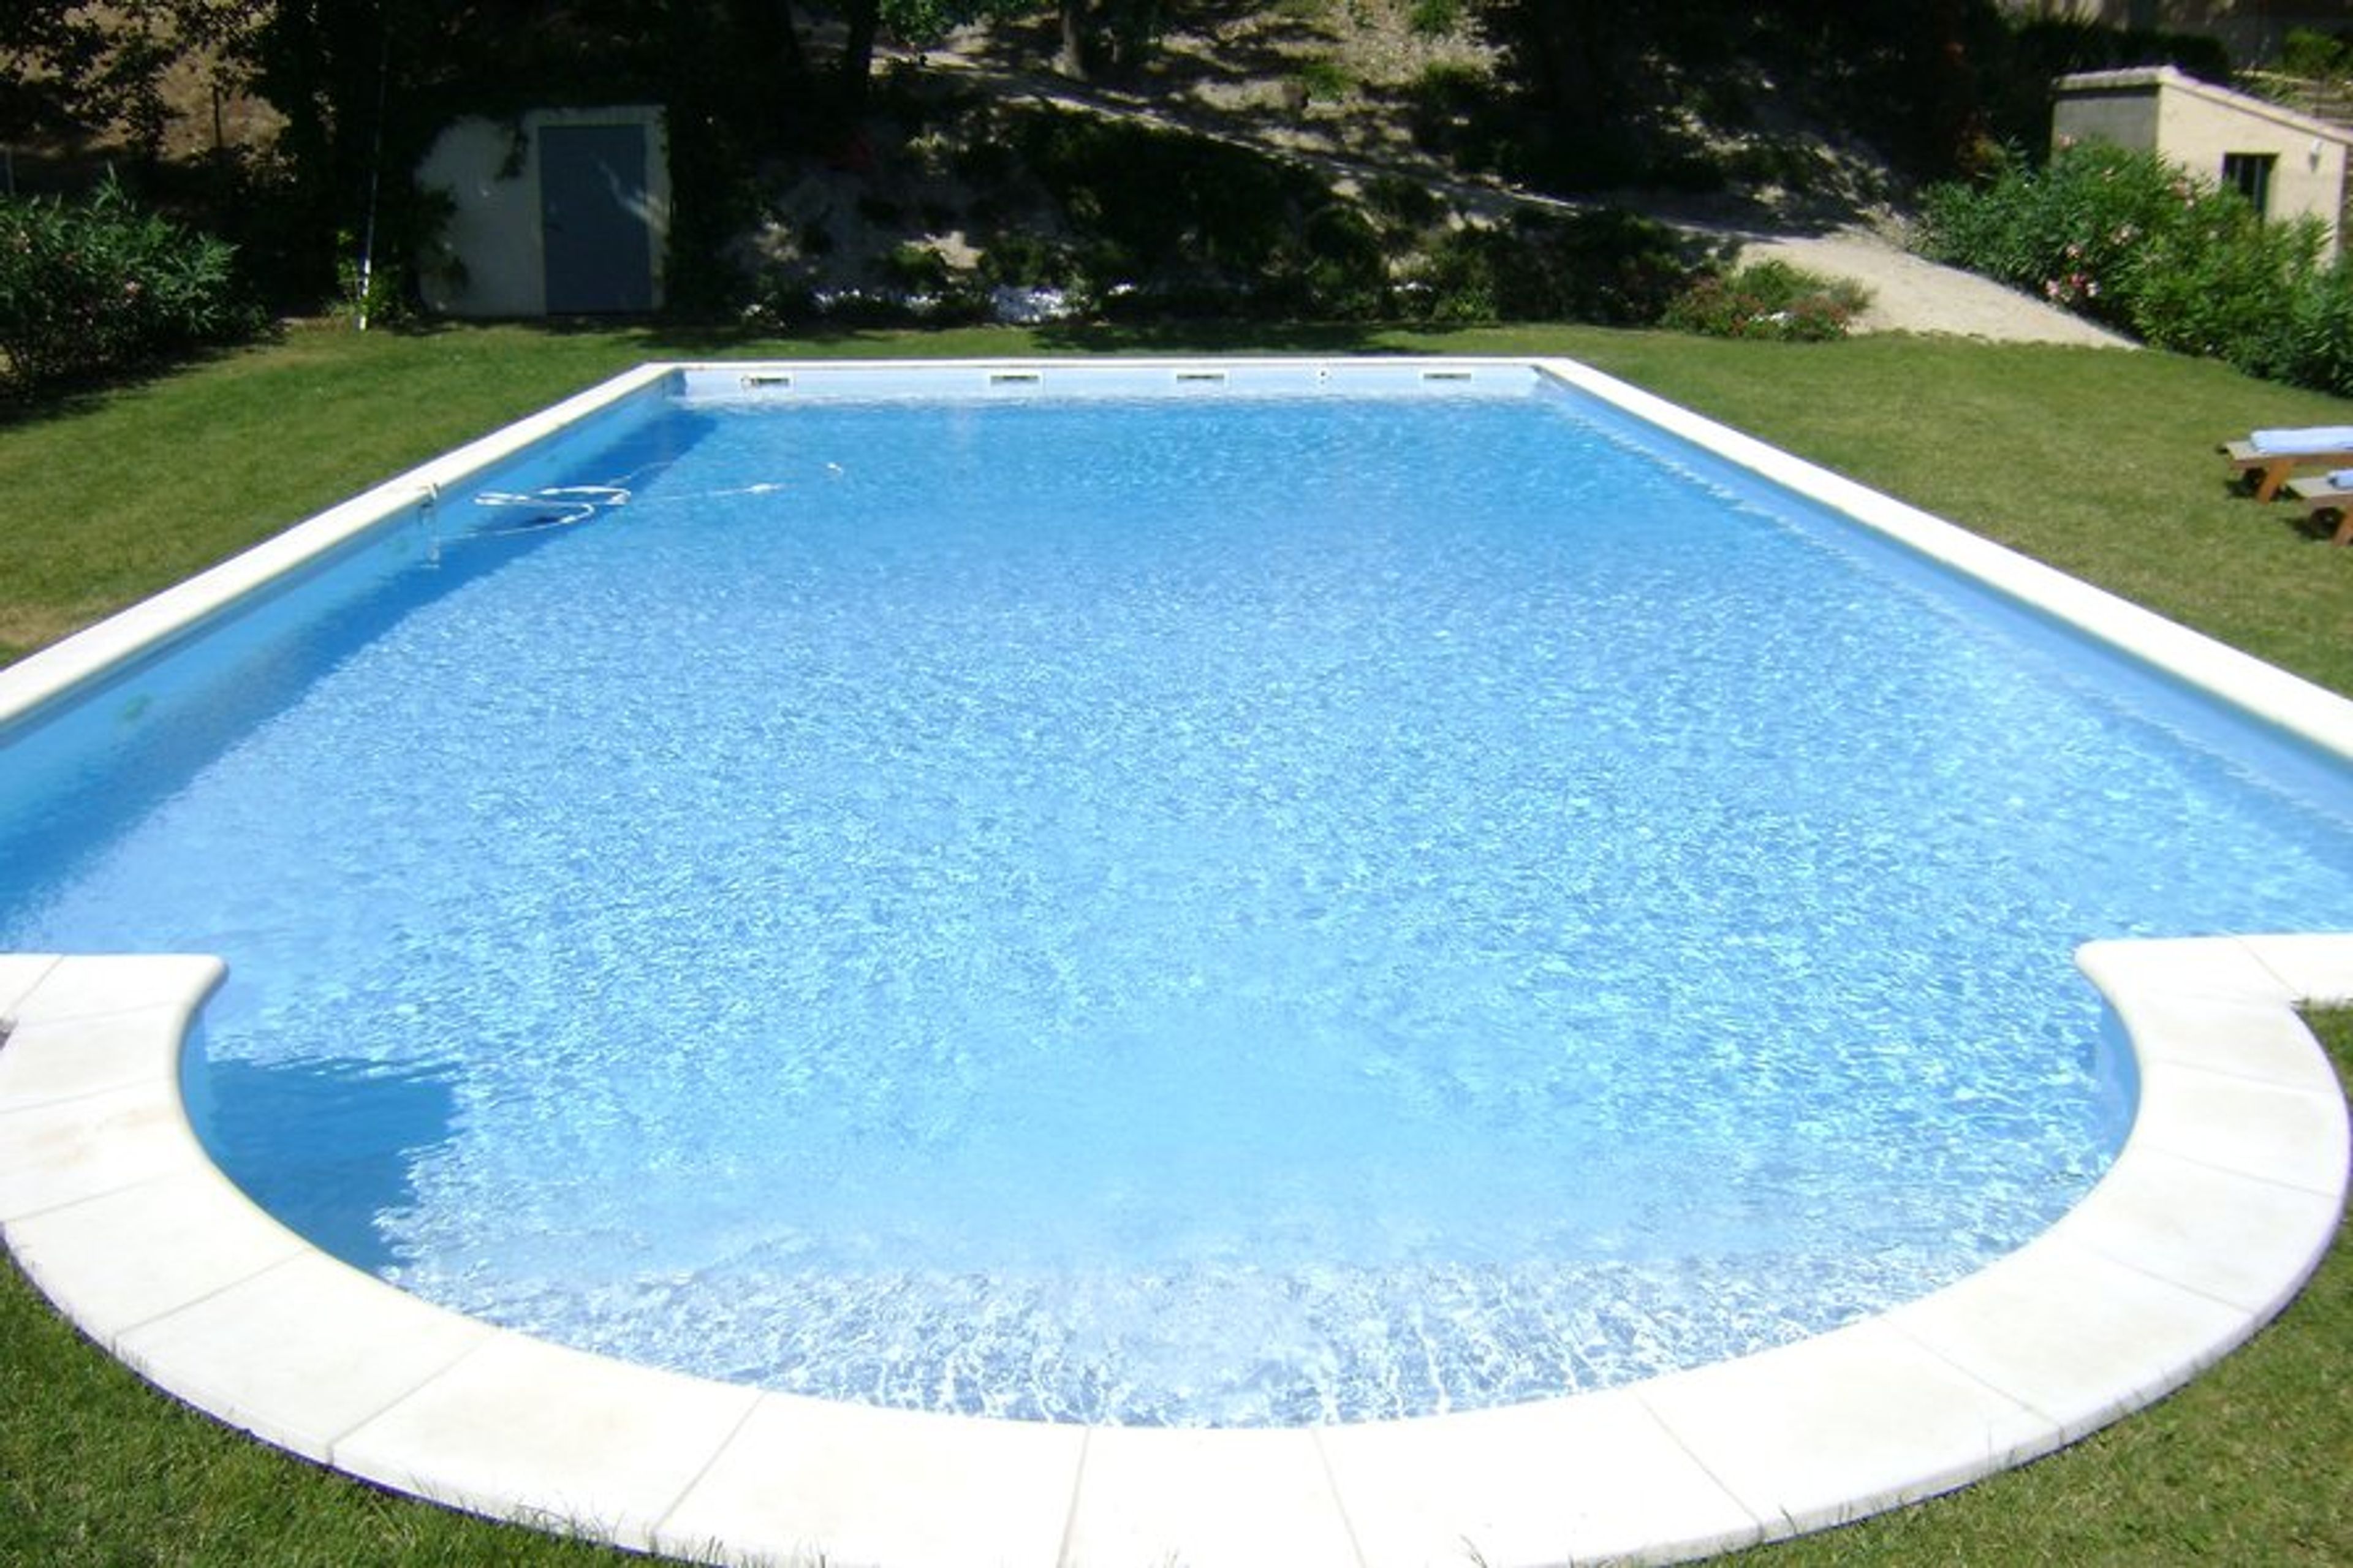 Huge 14 x 7 m pool with saline filtration and maintained weekly